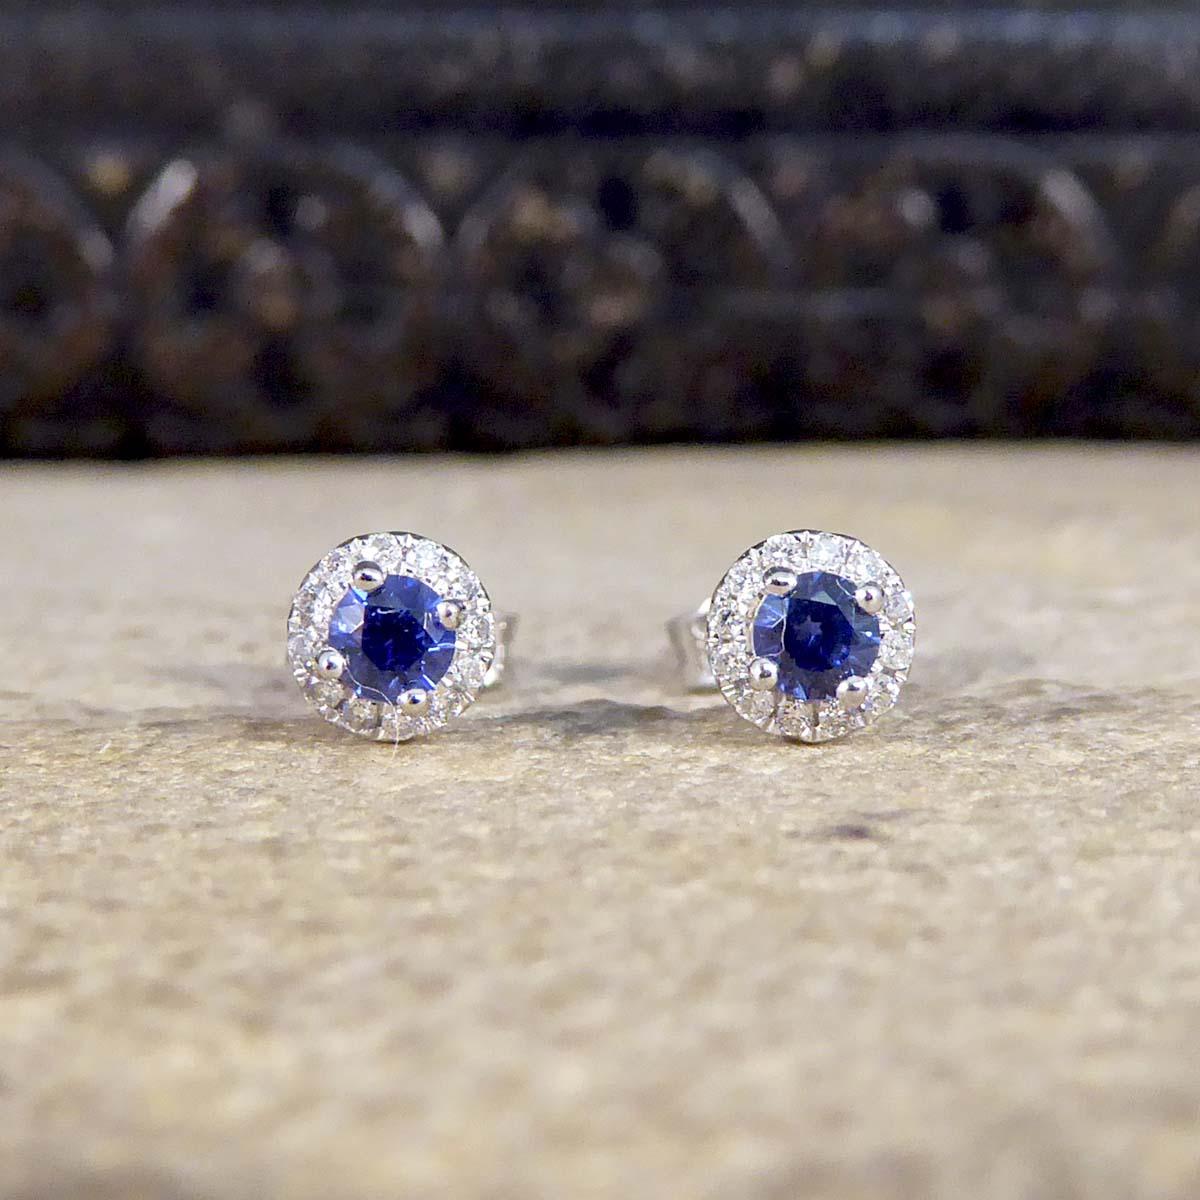 A lovely piece that will stand the test of time and never go out of style. These beautiful Sapphire and Diamond stud earrings have been crafted in a target style with a Sapphire in the centre surrounded by 12 equally sized Diamonds. Together both